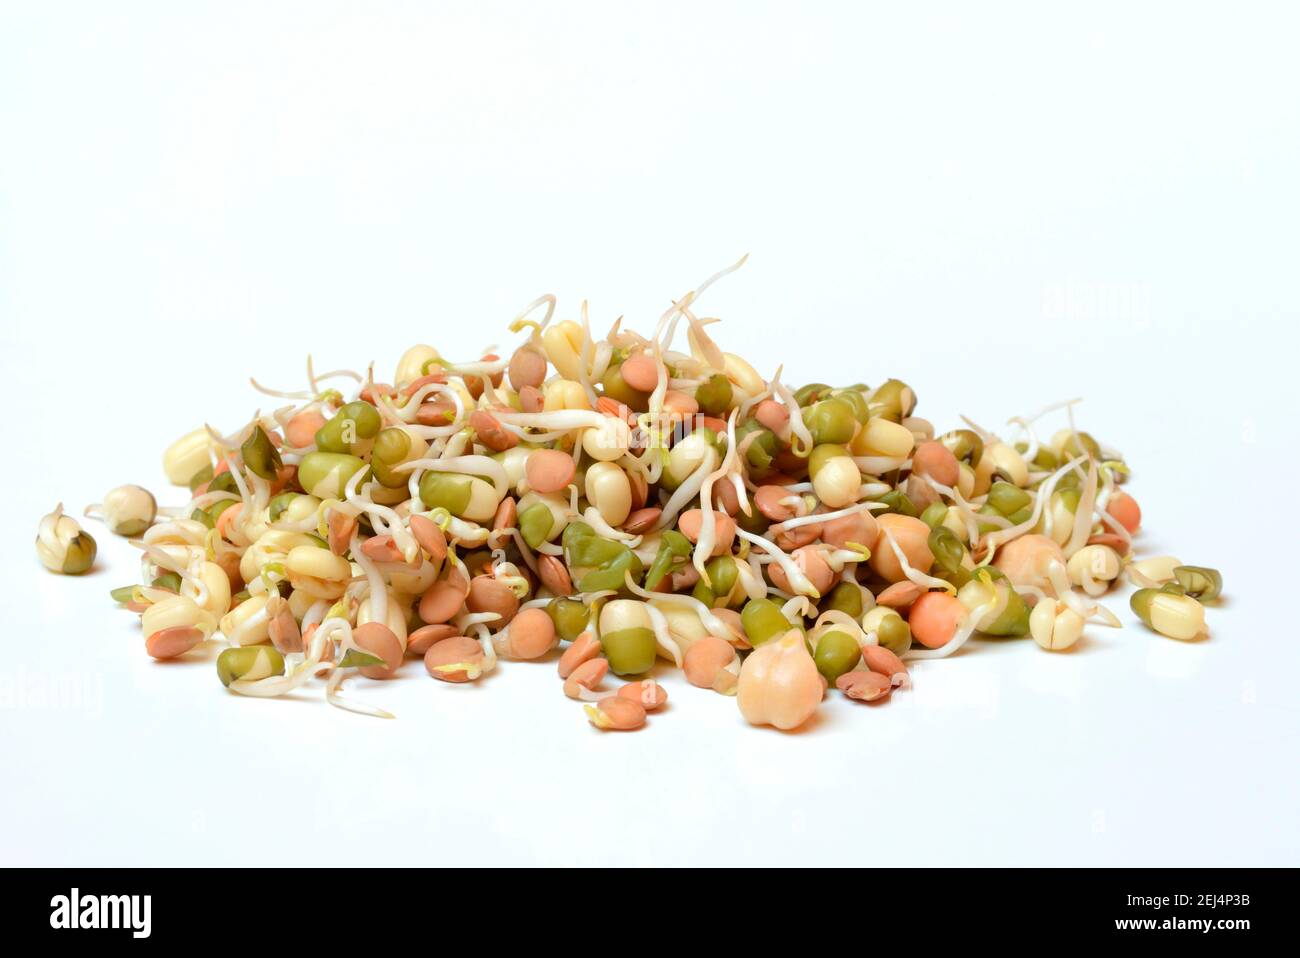 Mixed sprouts of lentils, mung beans and chickpeas, lentil sprouts, mung bean sprouts, chickpea sprouts Stock Photo